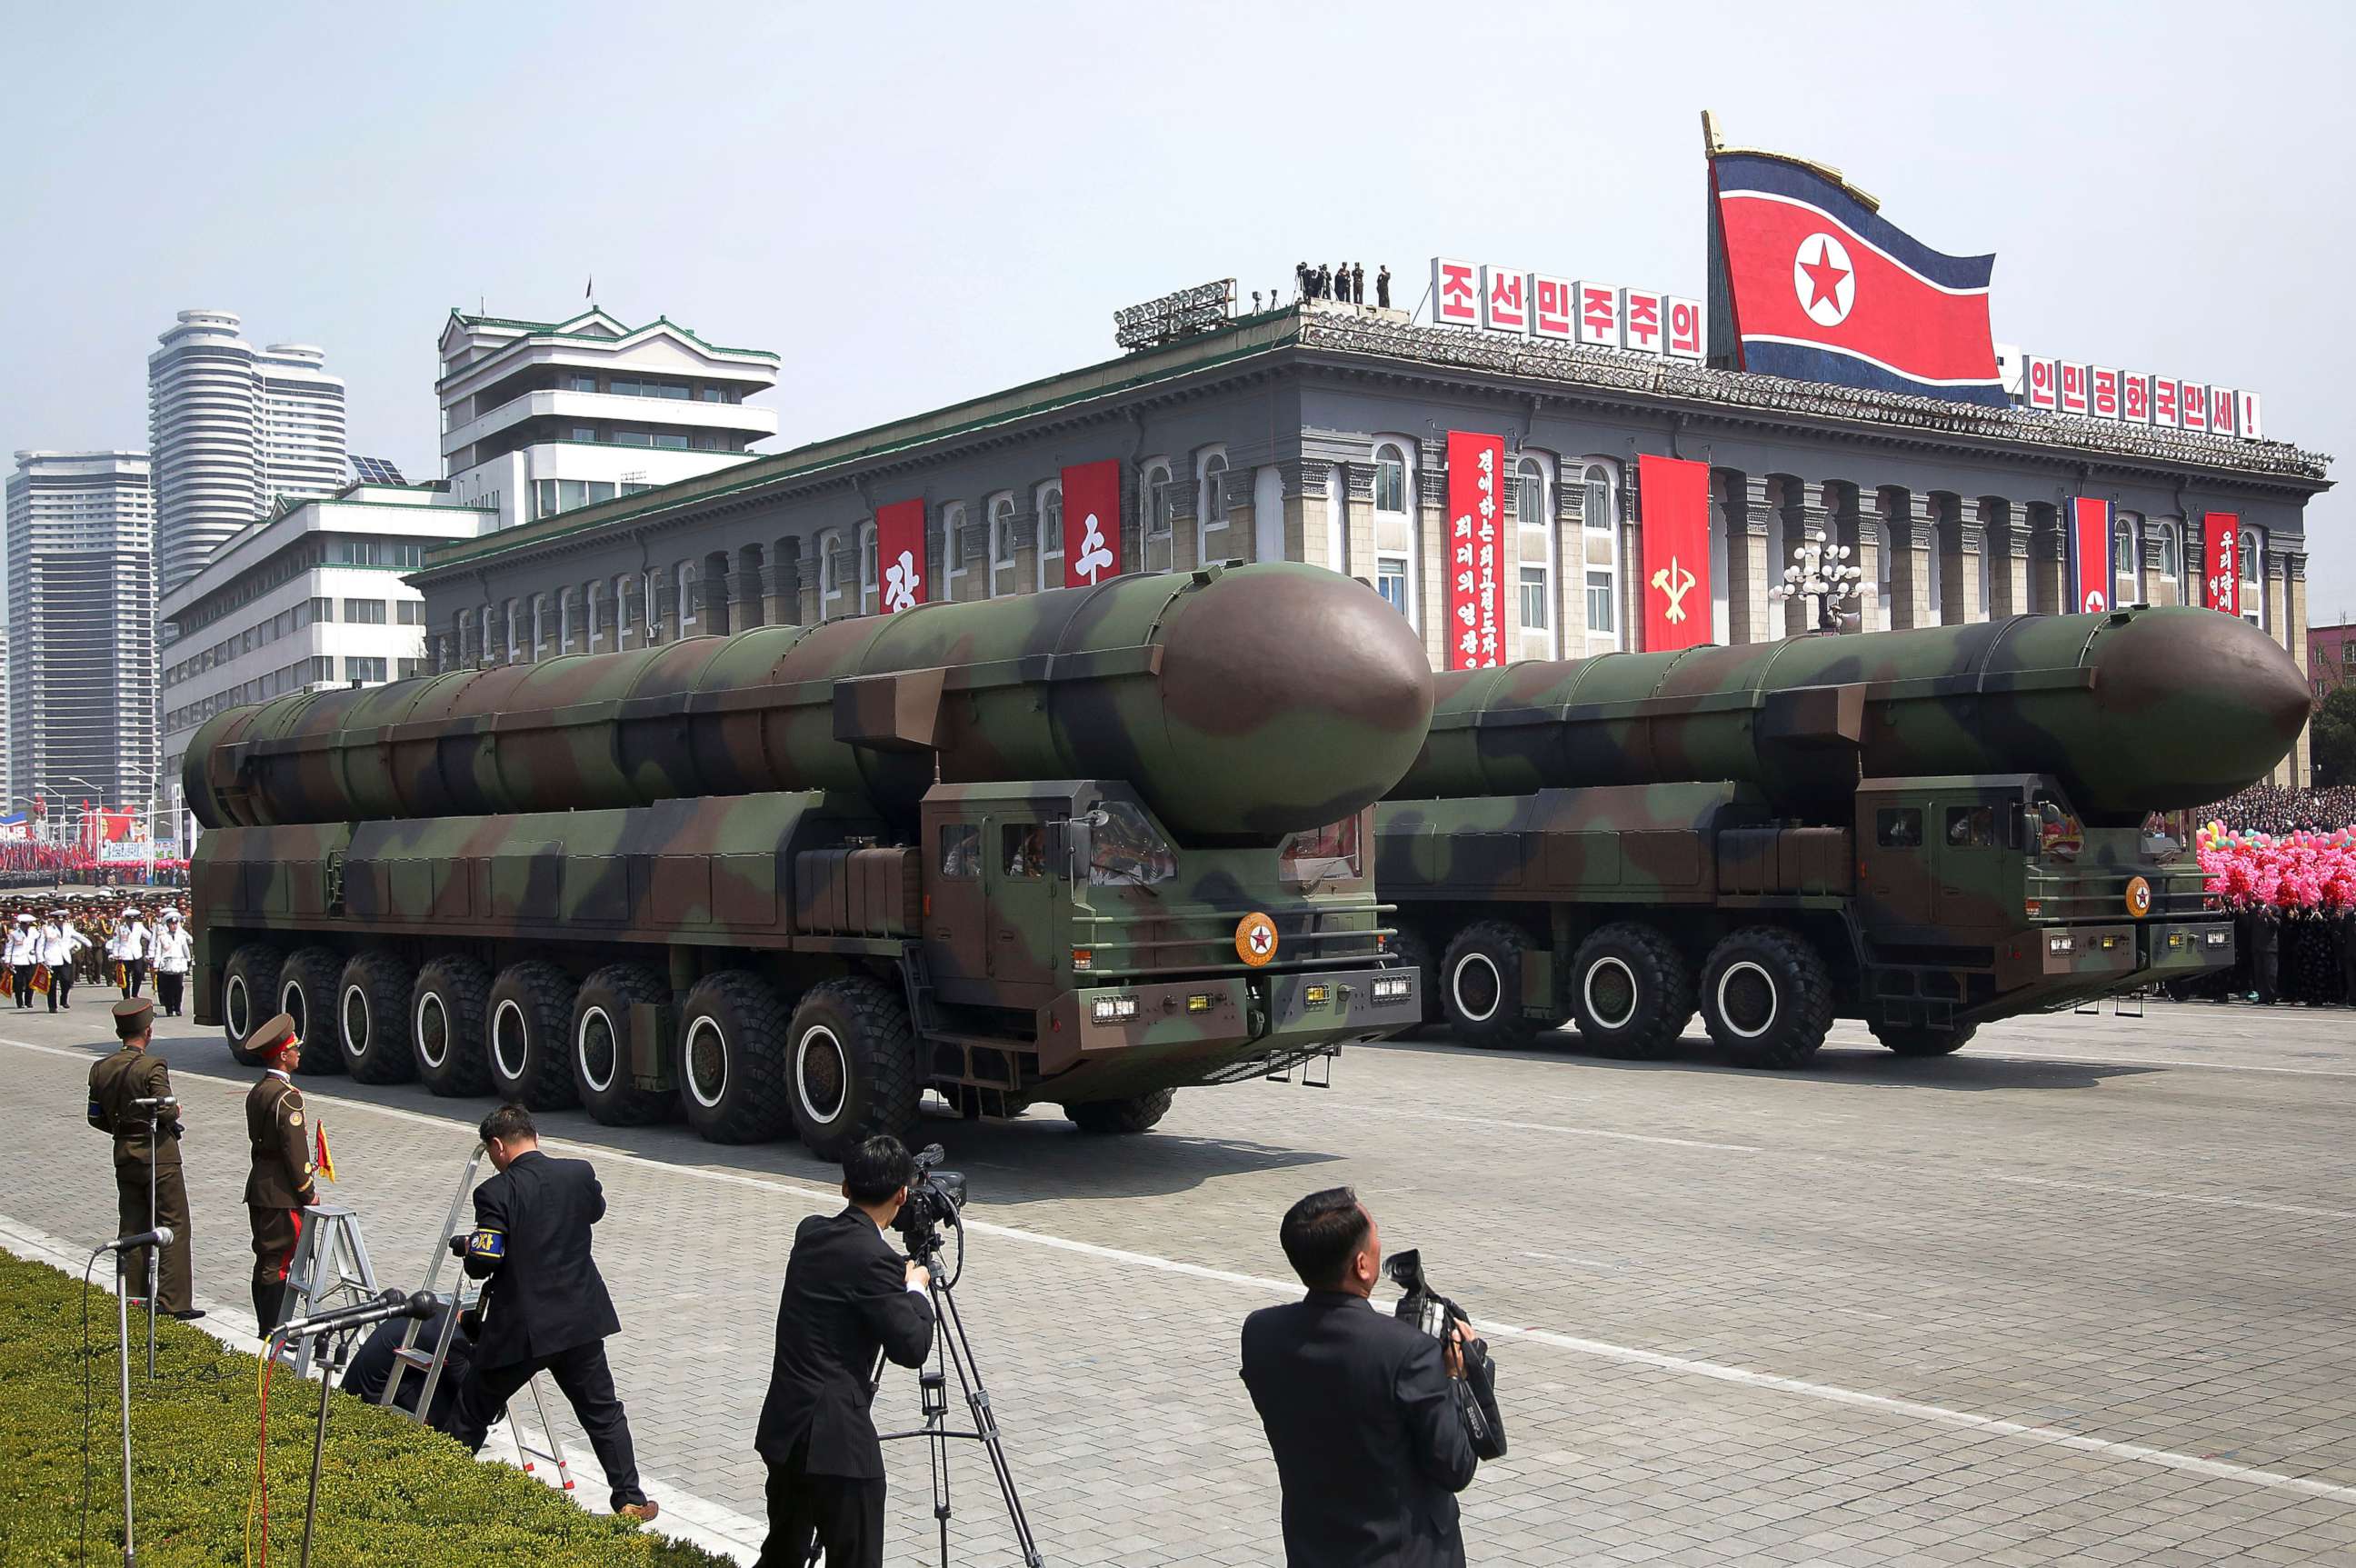 PHOTO: Missiles are paraded across Kim Il Sung Square during a military parade in Pyongyang, marking the 105th birth anniversary of Kim Il Sung, April 15, 2017.